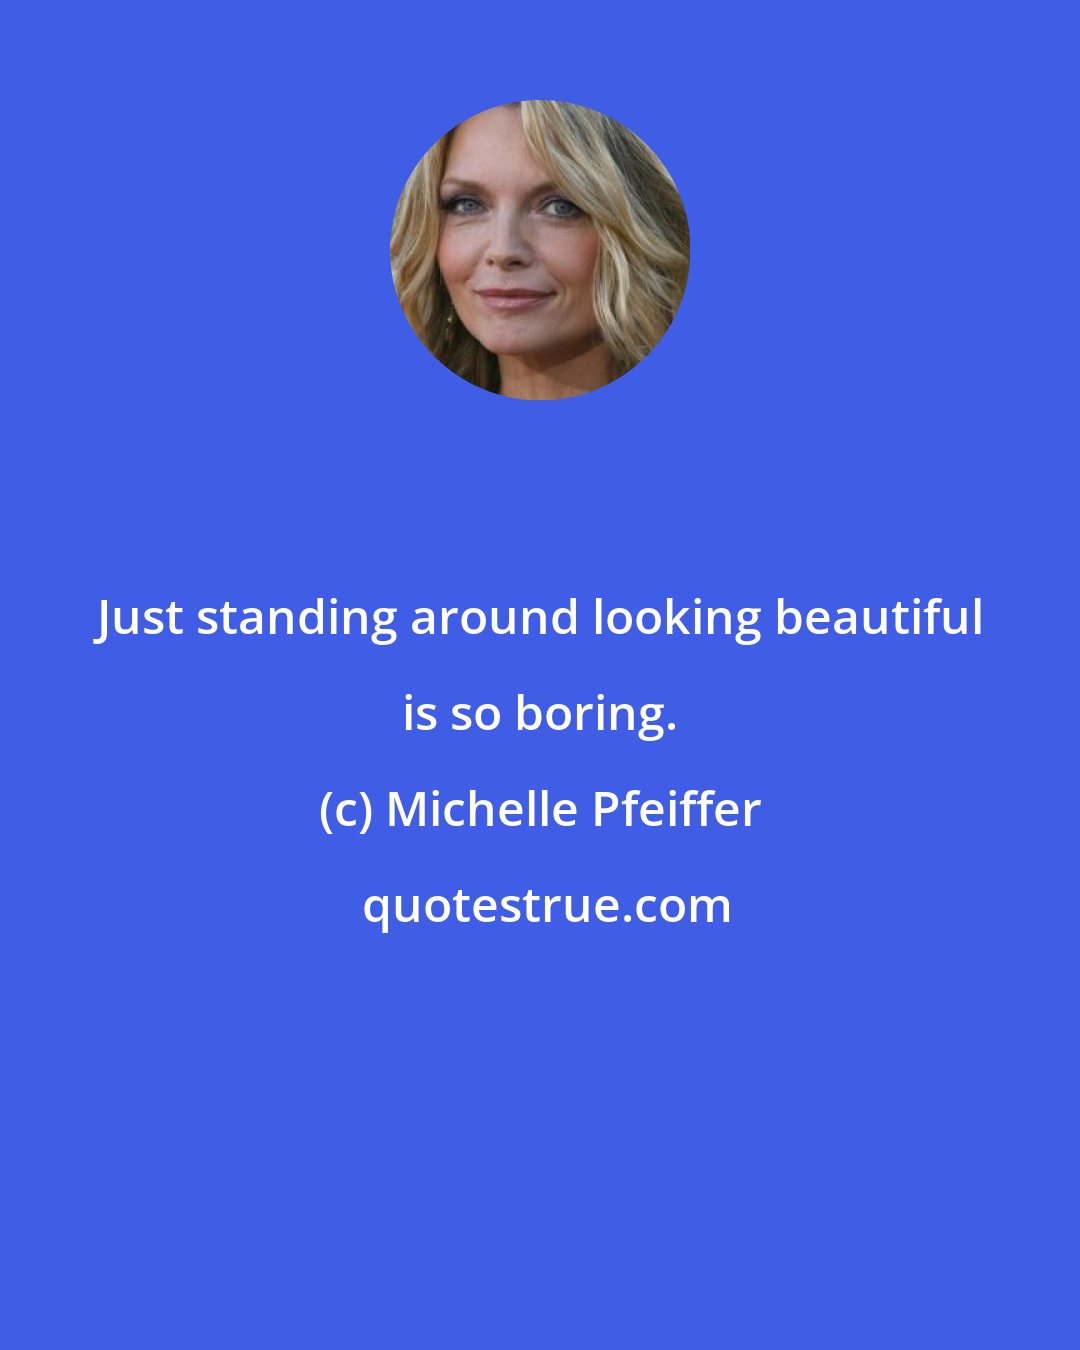 Michelle Pfeiffer: Just standing around looking beautiful is so boring.